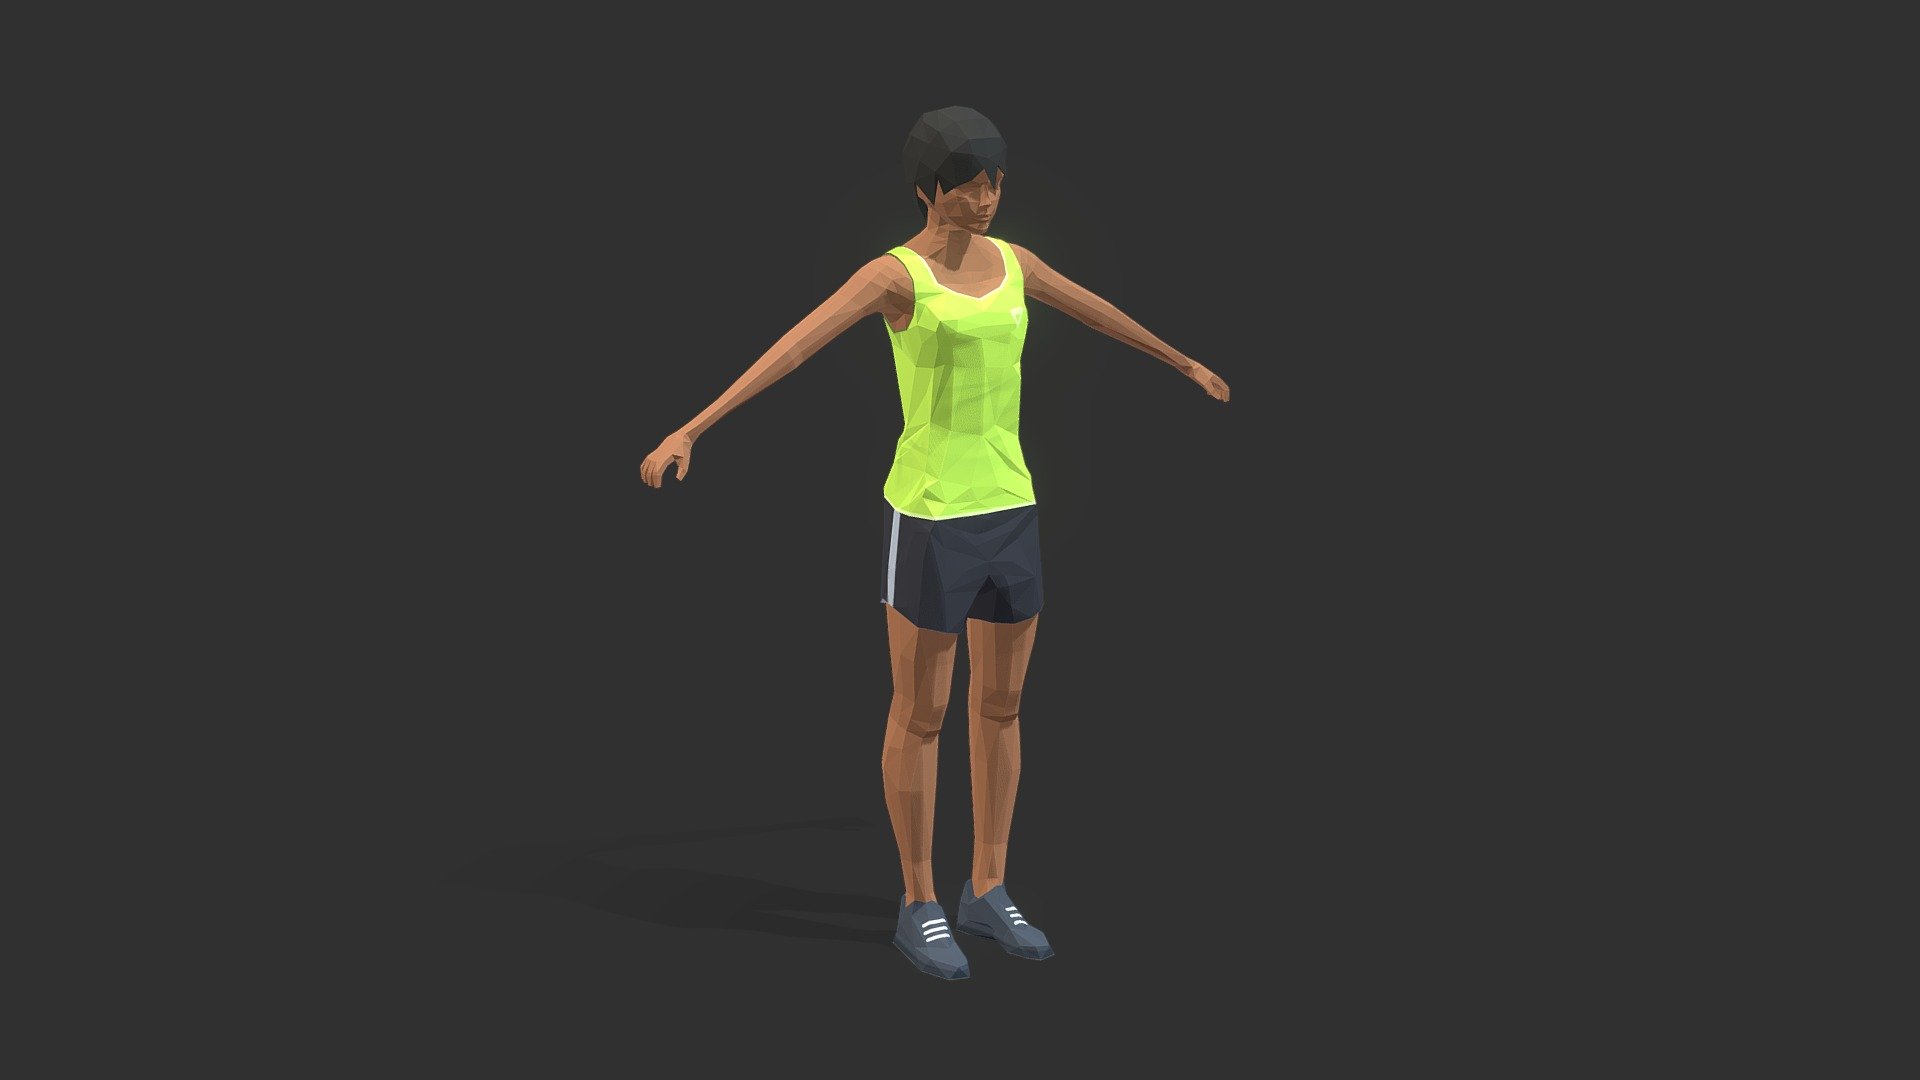 Rigged model of a woman in an exercise outfit.
2048x2048 pixels of the texture. 
Riged by CAT system.
FBX exported with the skeleton. 
+4 extra textures - Low Poly Woman Exercise RIG - Buy Royalty Free 3D model by danielmikulik 3d model